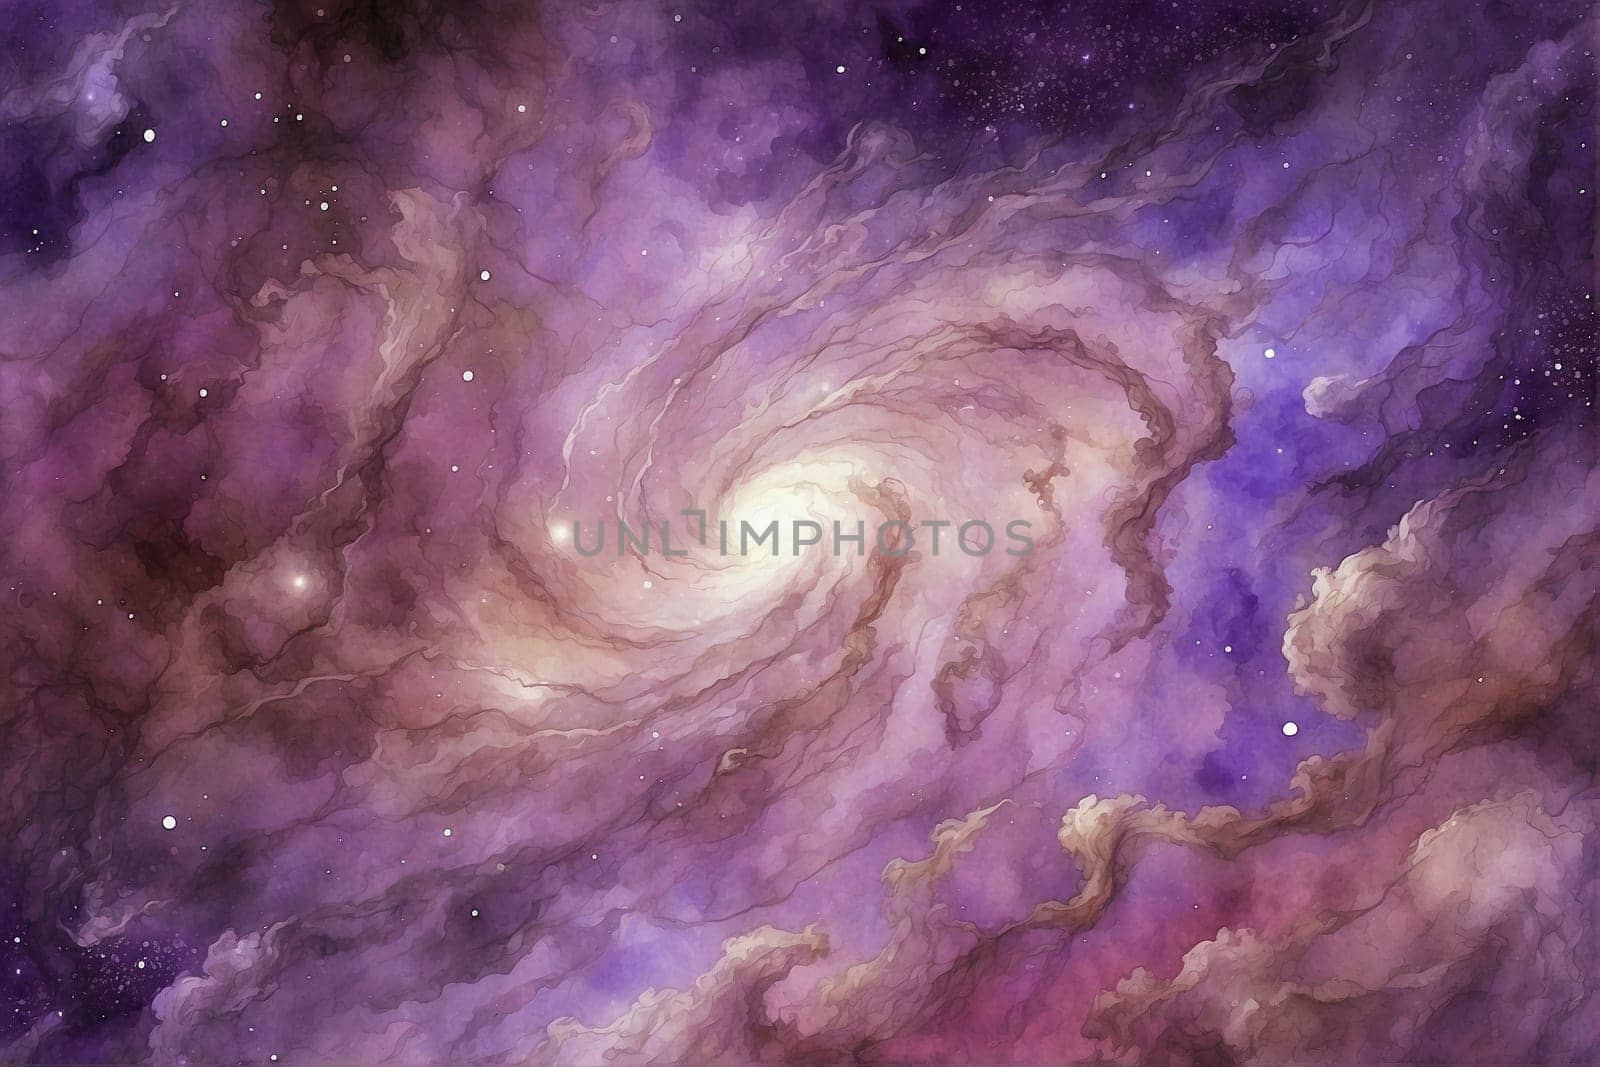 This image showcases a vibrant galaxy with hues of purple and blue, capturing the beauty of the cosmos.